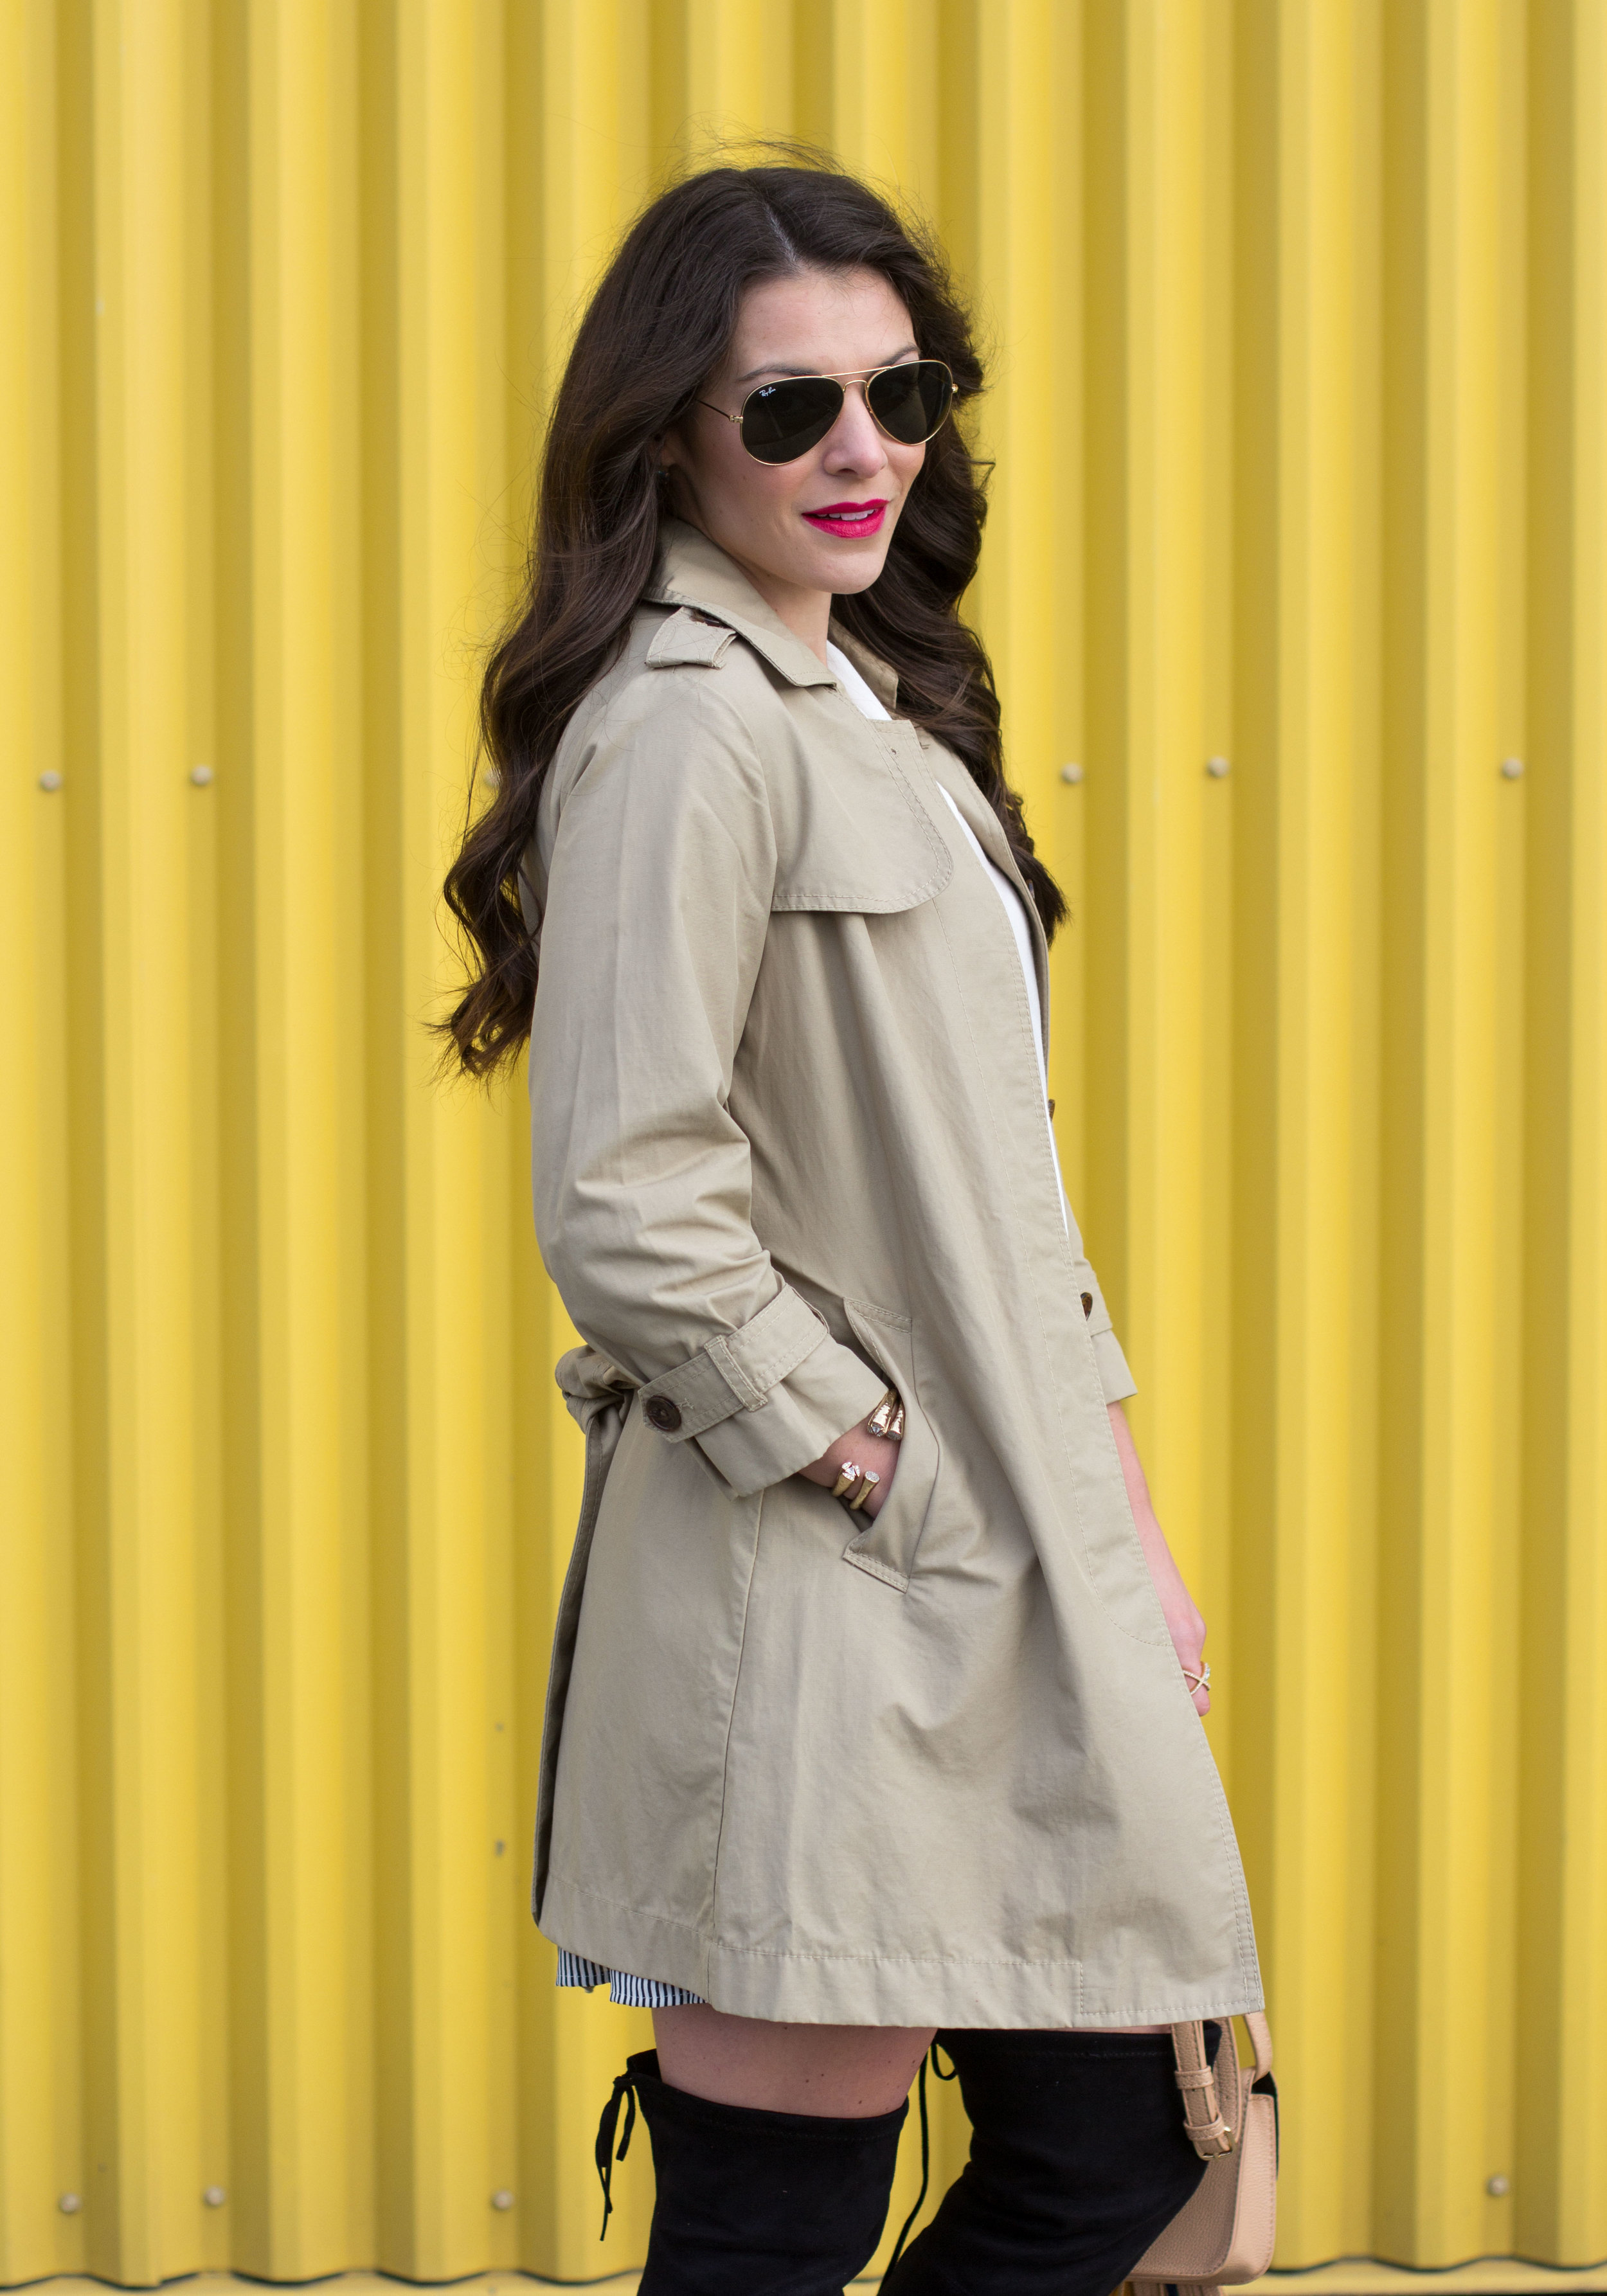 Transition You Wardrobe Into Spring, Steve Madden Gorgeous Boots, Banana Republic Embroidered Trim Mini Skirt, White Bow Blouse, Classic Trench Coat, Rebecca Minkoff Tassel Bag DIY